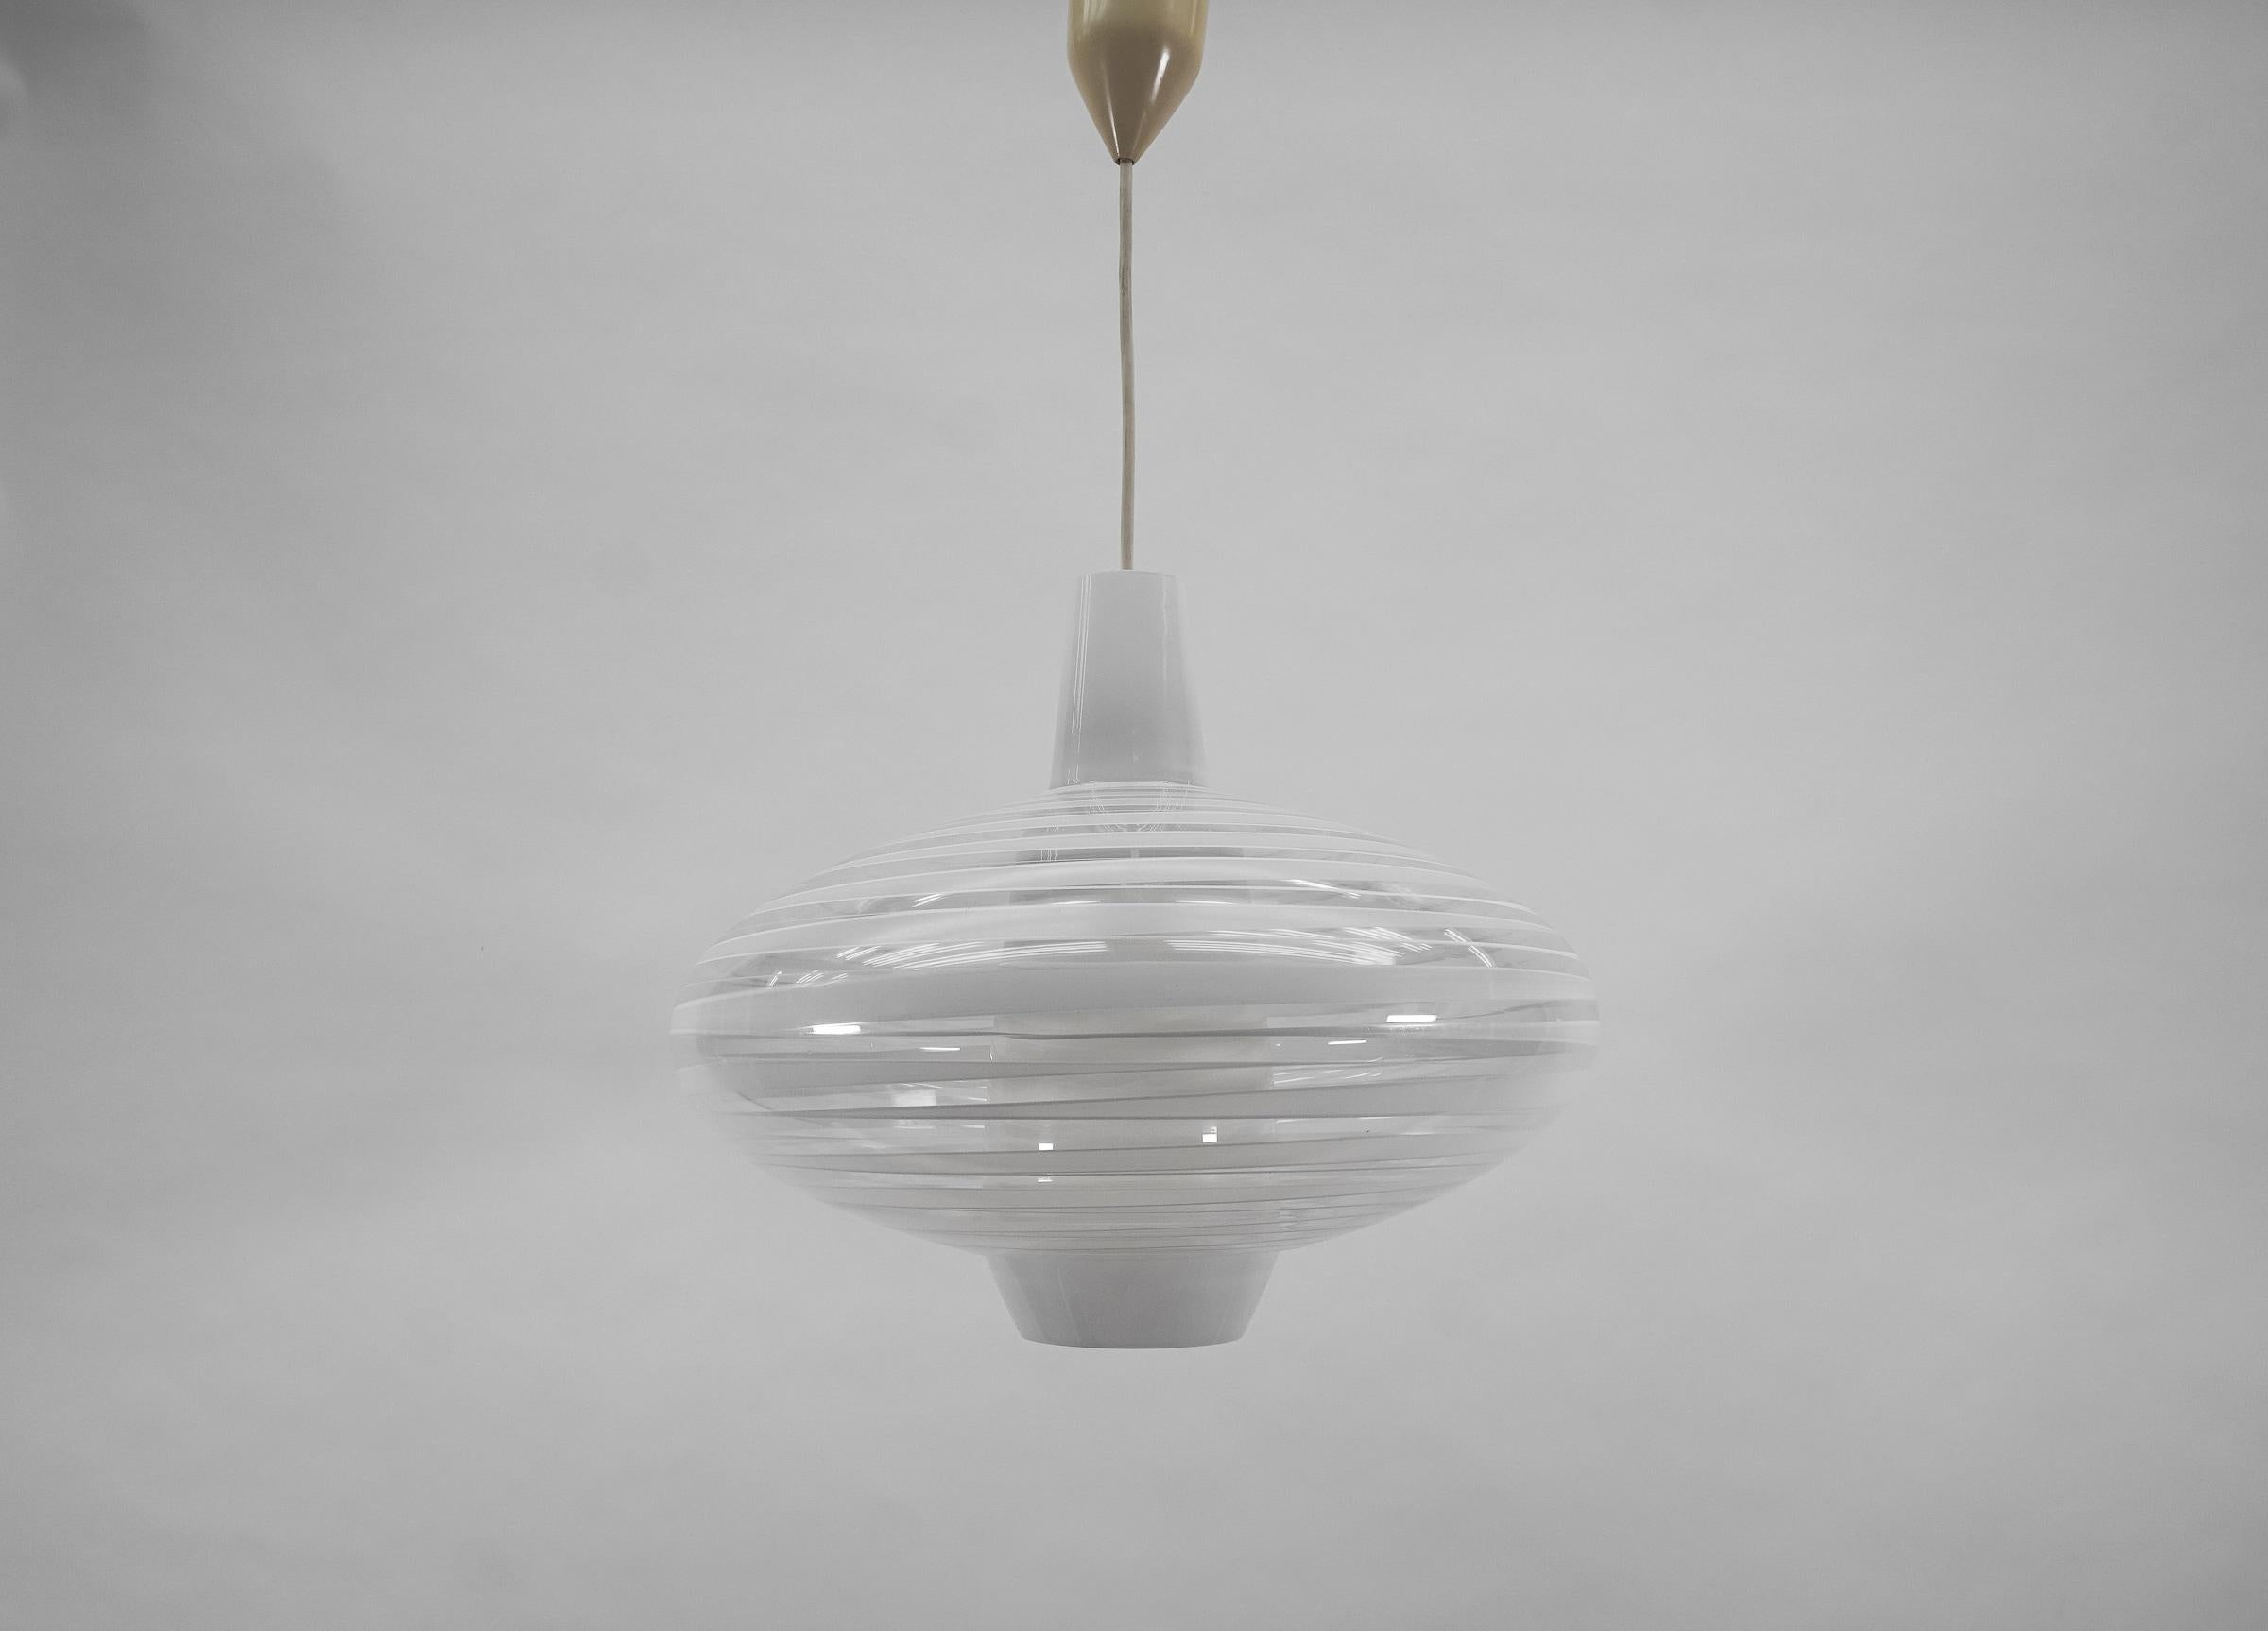 Ceiling lamp by Aloys Ferdinand Gangkofner for Peill & Putzler. Germany Düren 1960s.

Exterior: Light glass with frosted decor
Interior: Opal overlay

The design is by Aloys Gangkofner, model Bari, he worked after Wagenfeld from 1953 - 1956 for